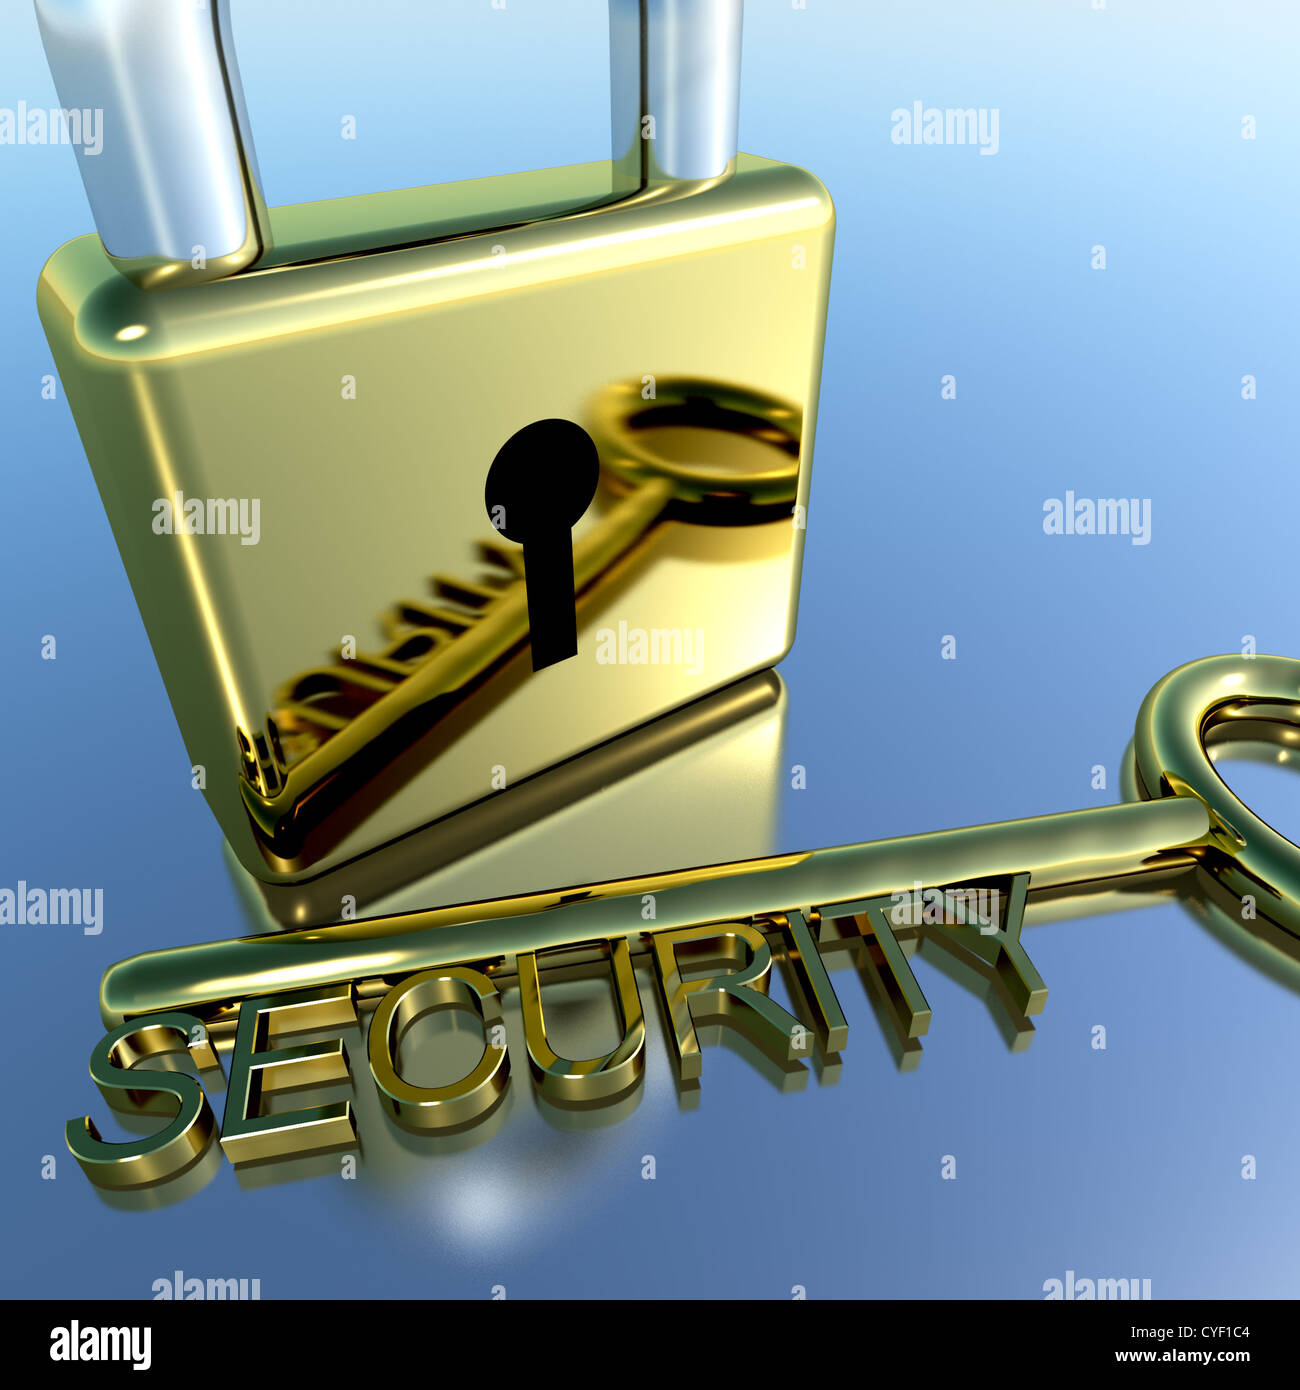 Padlock With Security Key Showing Protection Encryption Or Safety Stock Photo